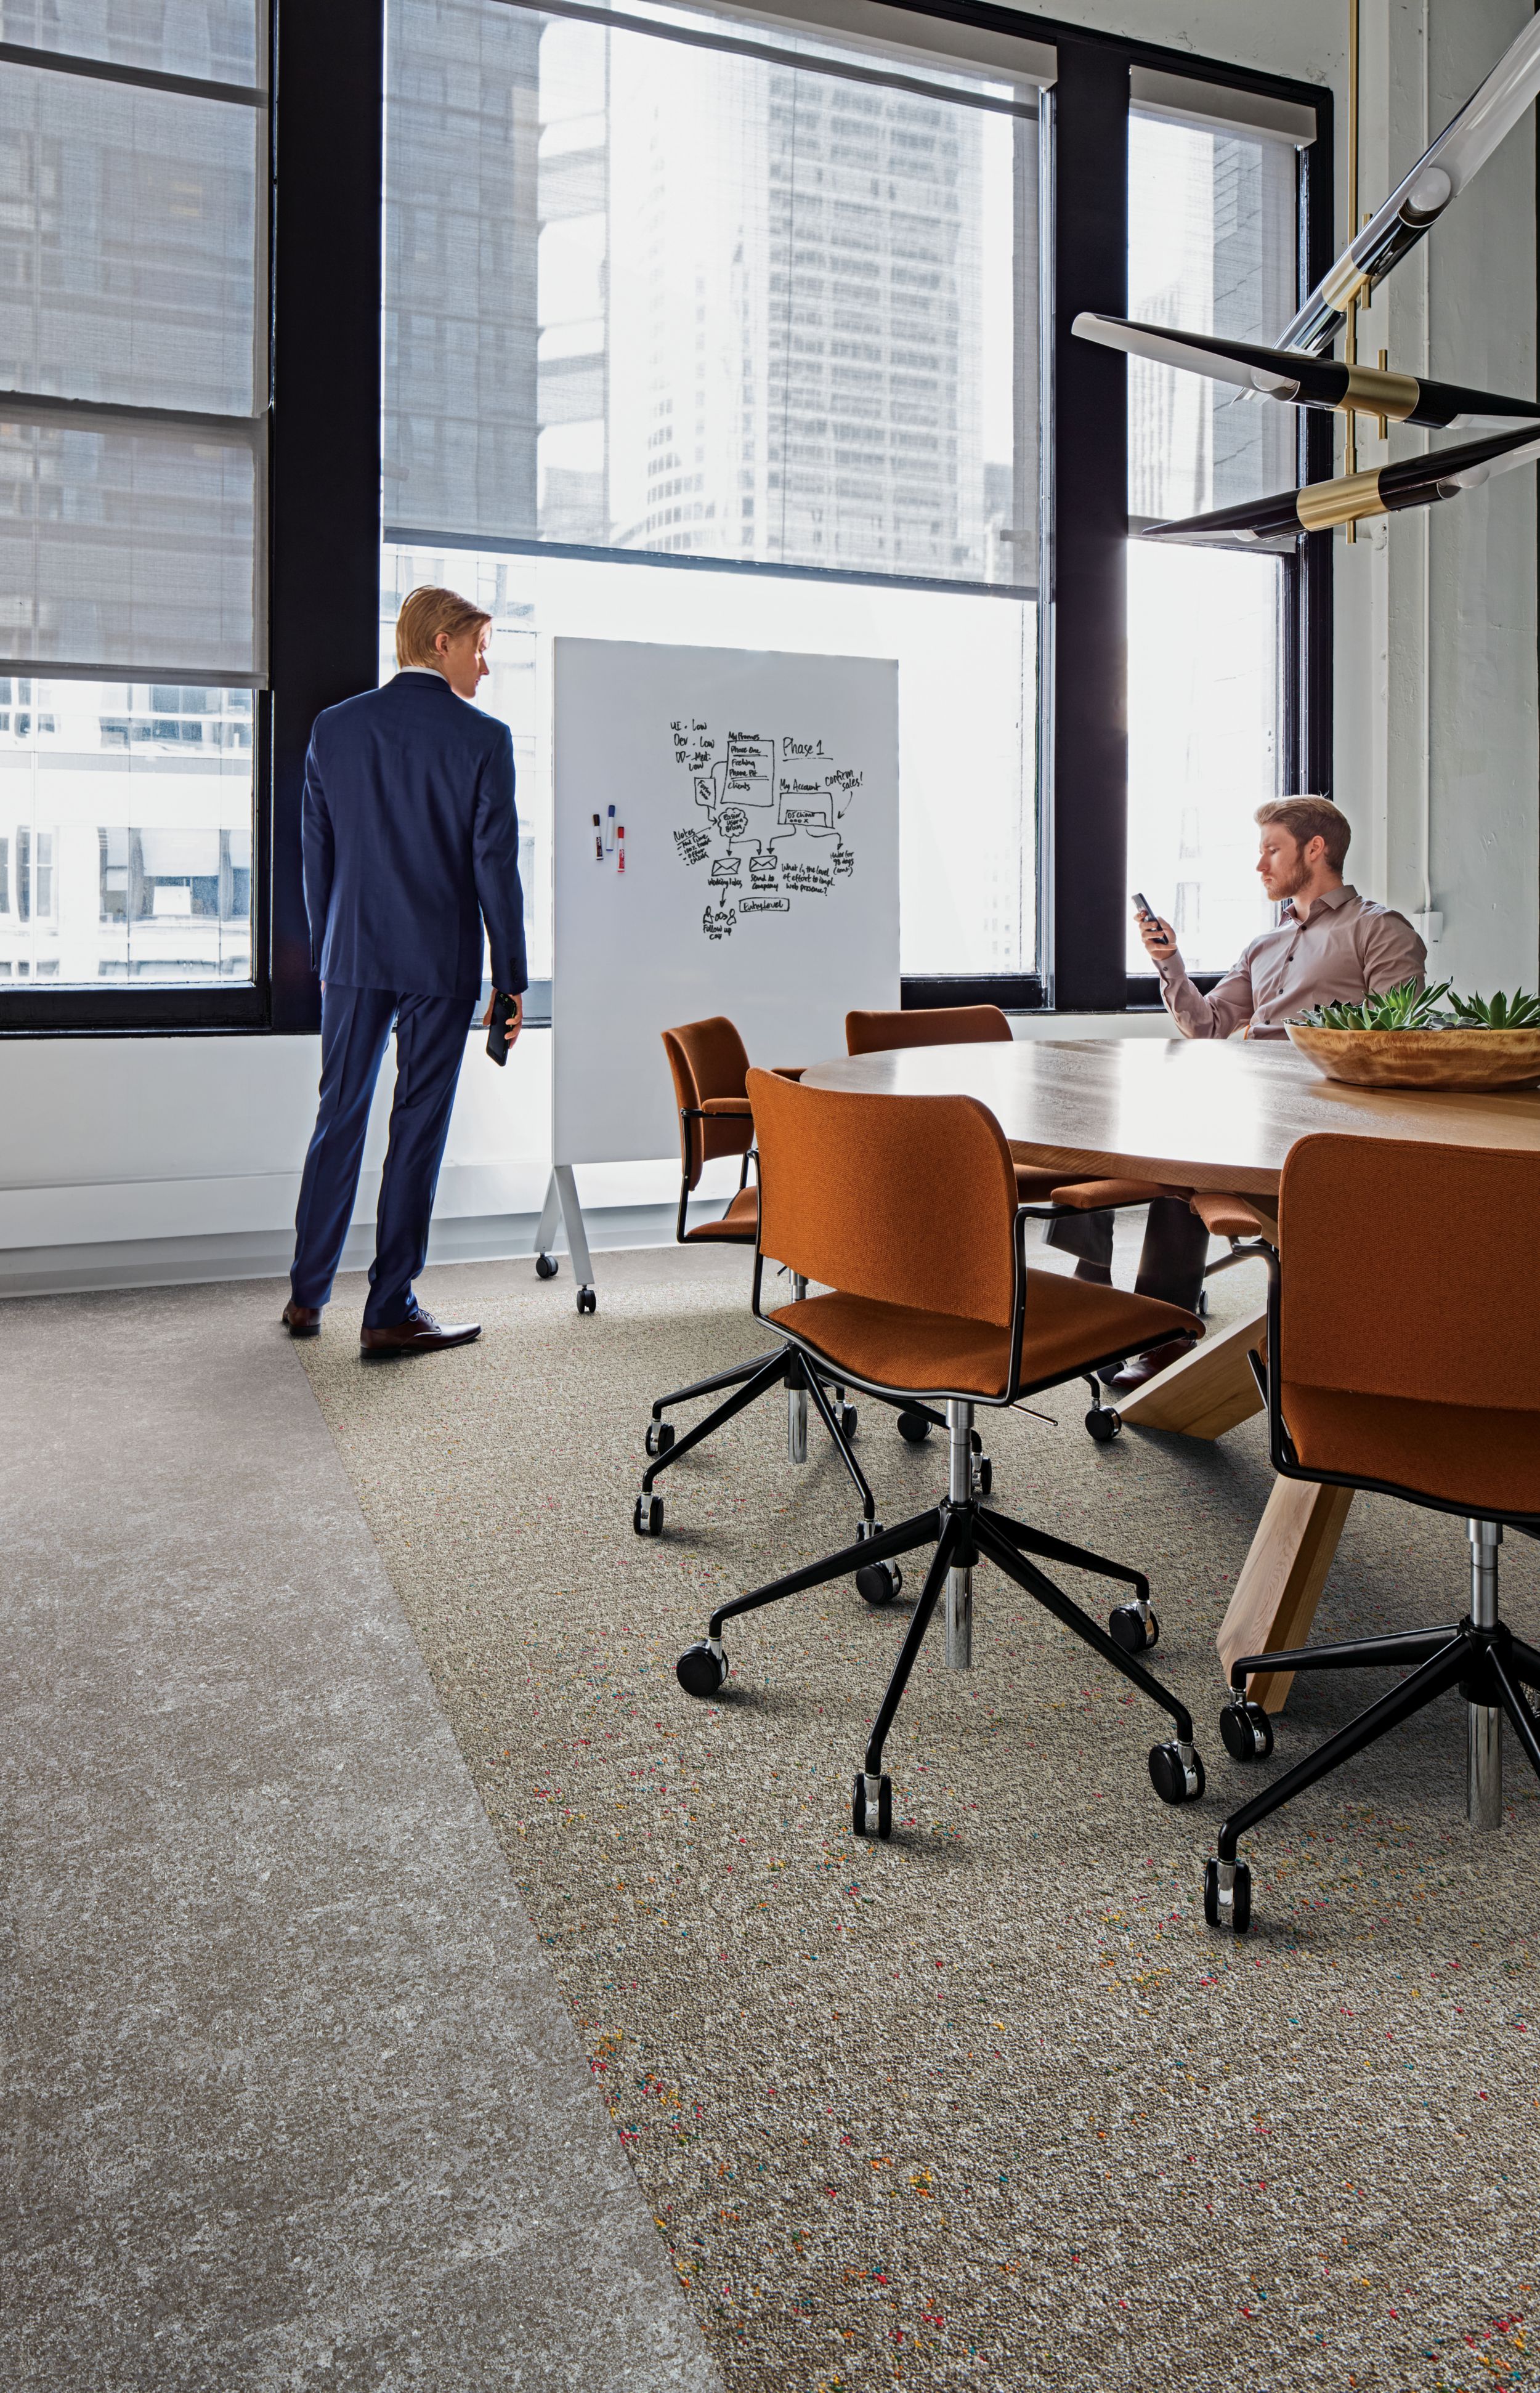 Interface Walk of Life LVT and Step Aside carpet tile in meeting space with conference table and chairs número de imagen 3